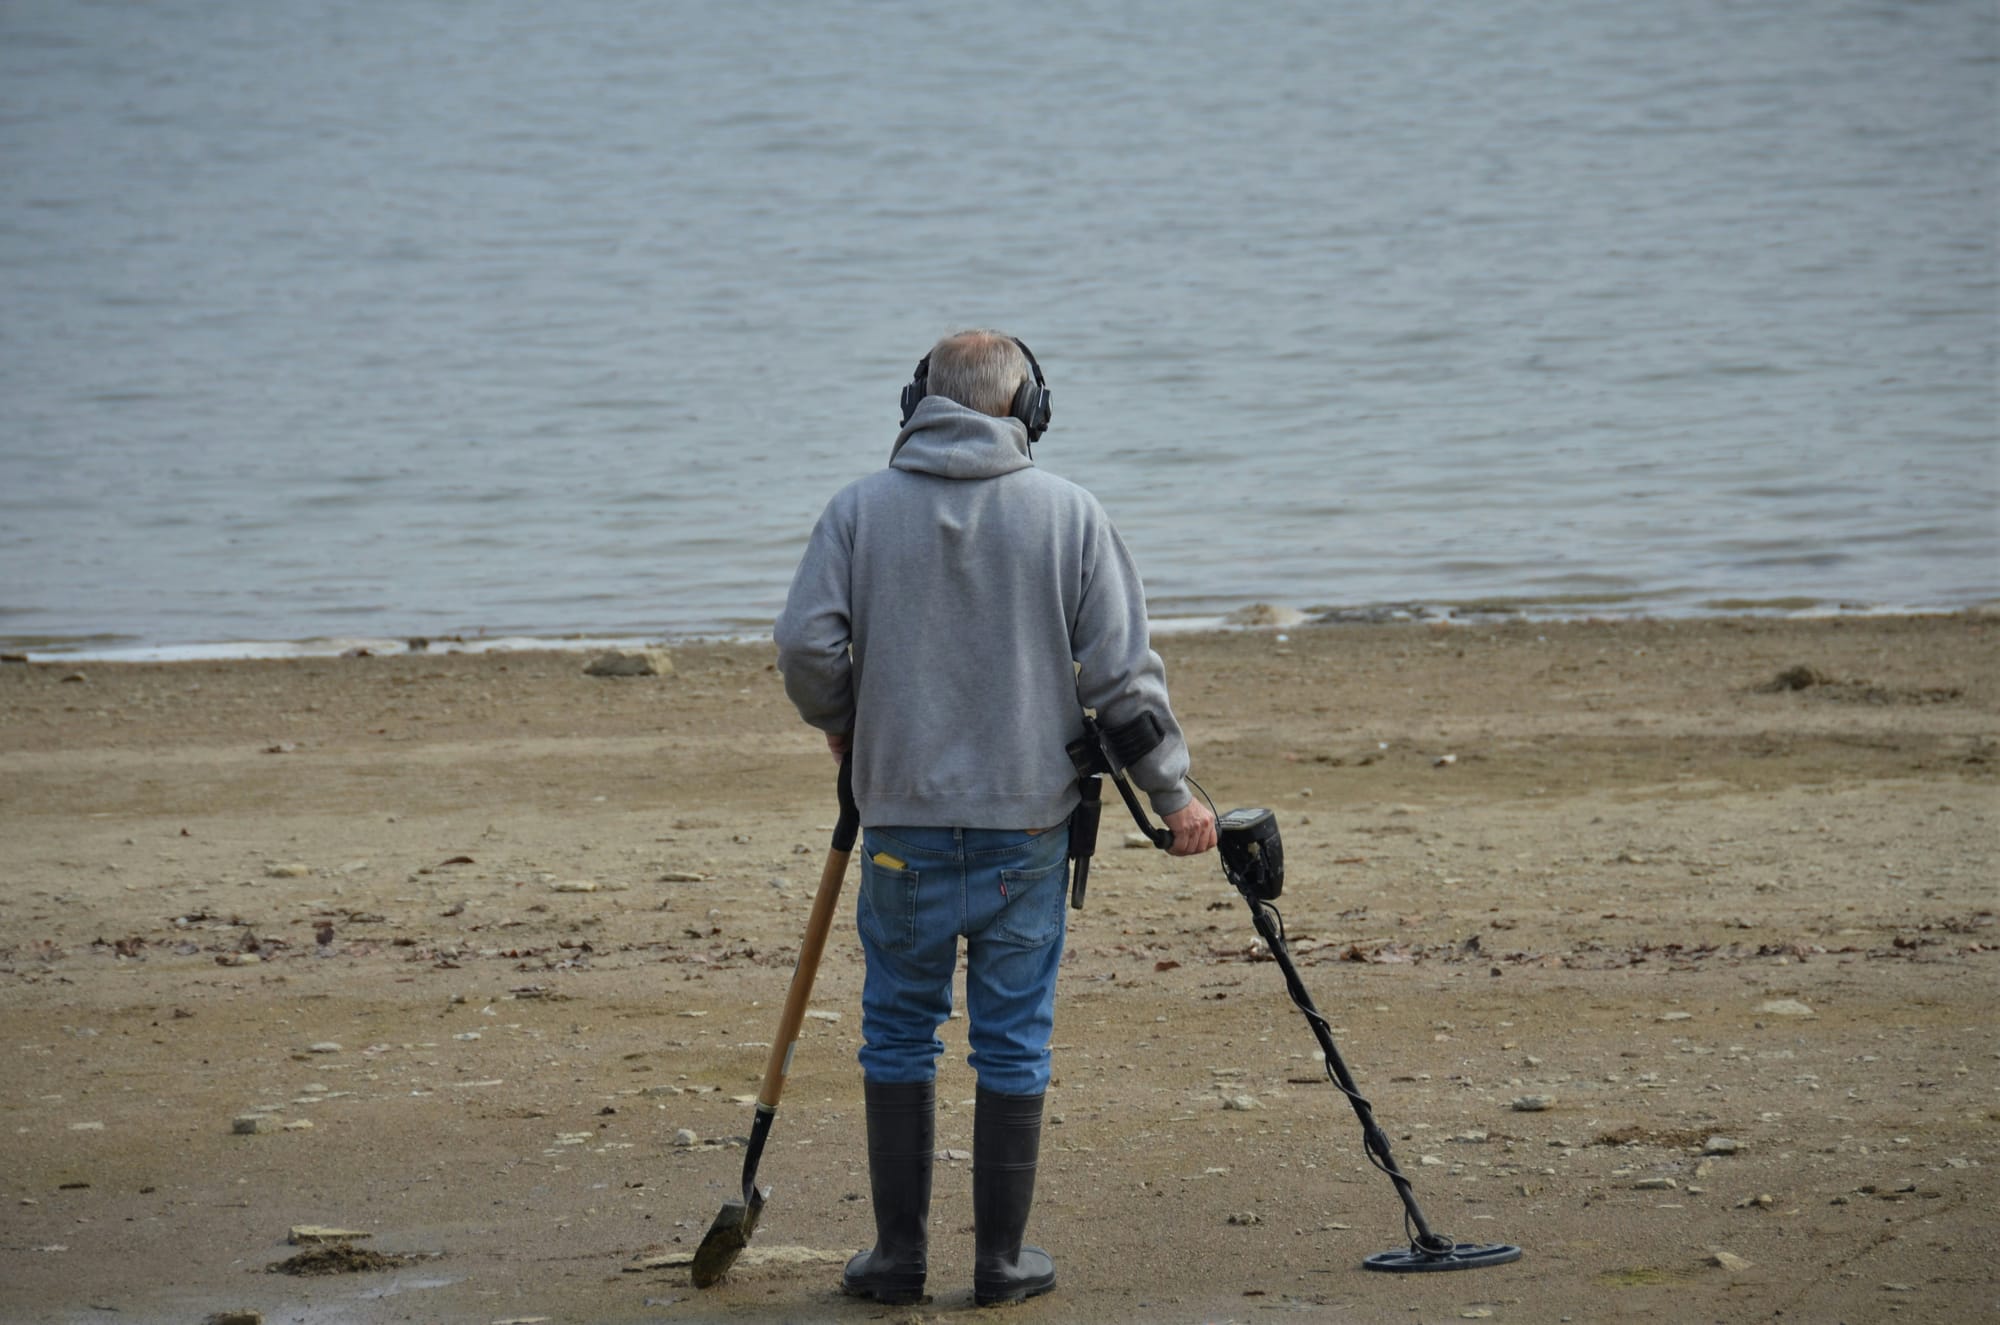 How to Read Your Metal Detector Properly